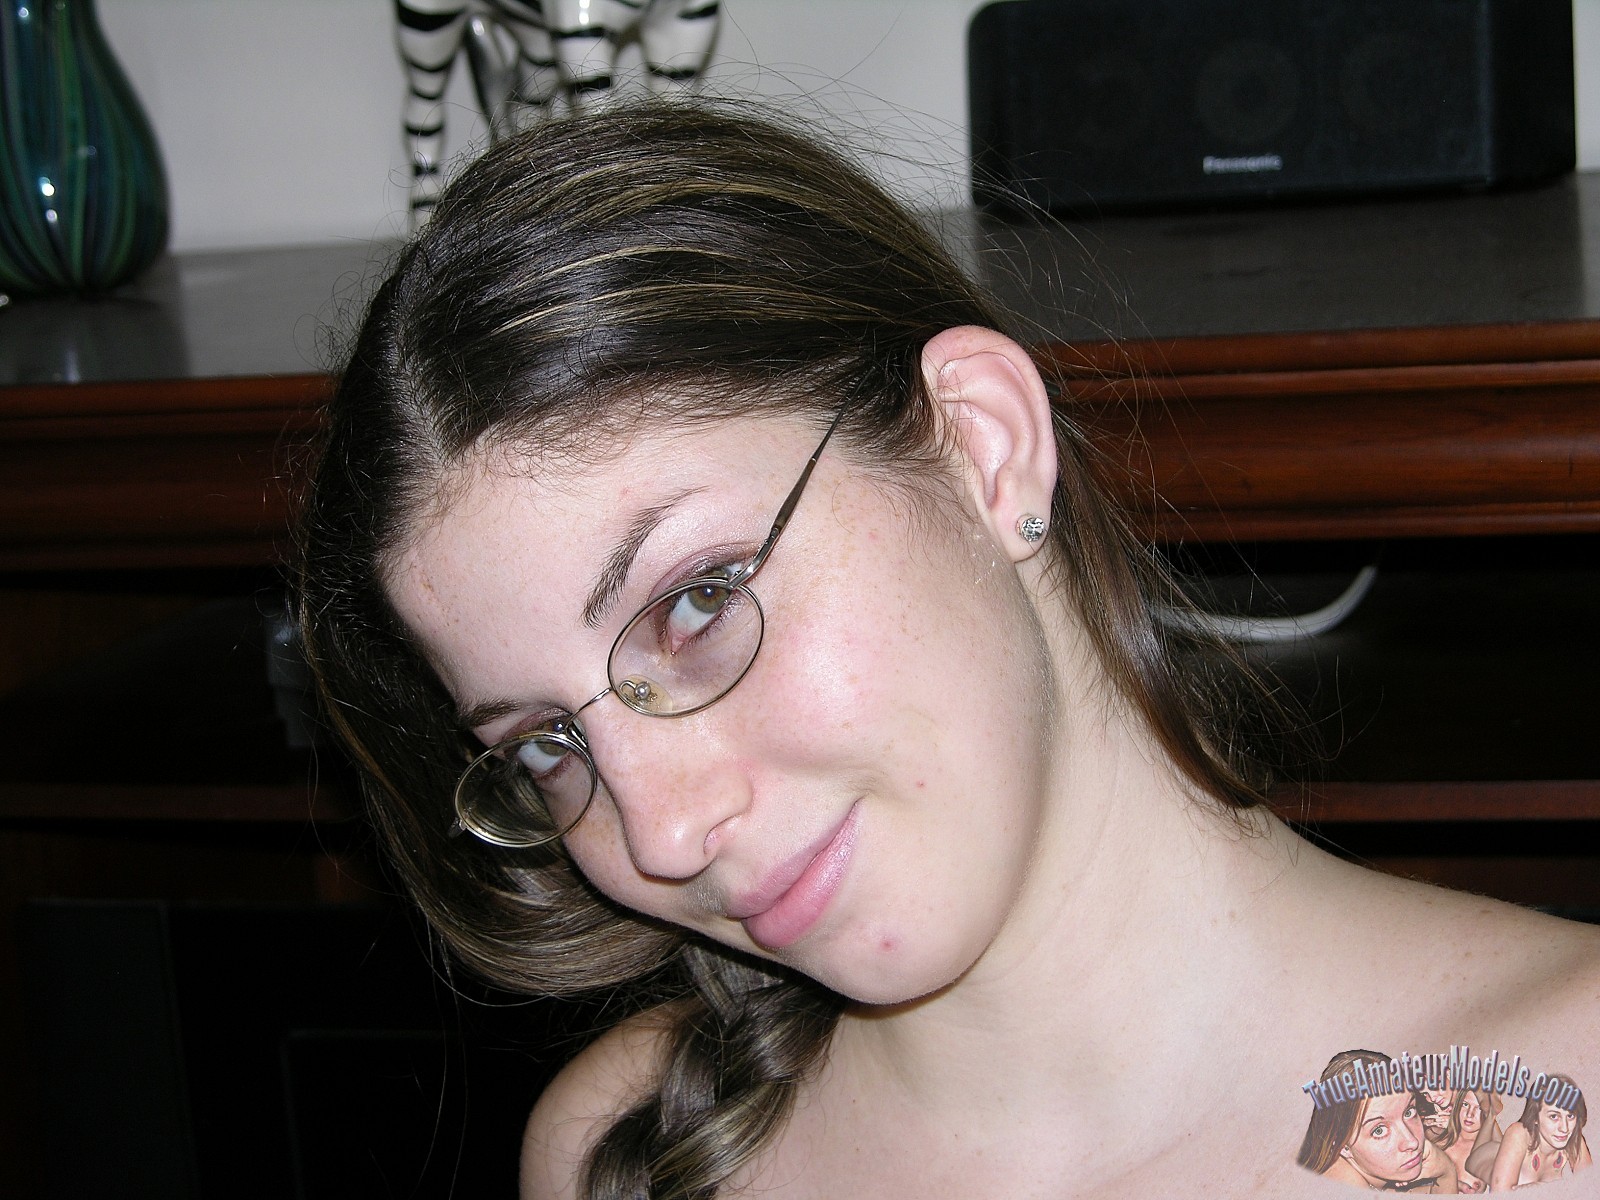 Amateur Tiny Breasted Petite Teen In Glasses - True Amateur Models #67293415